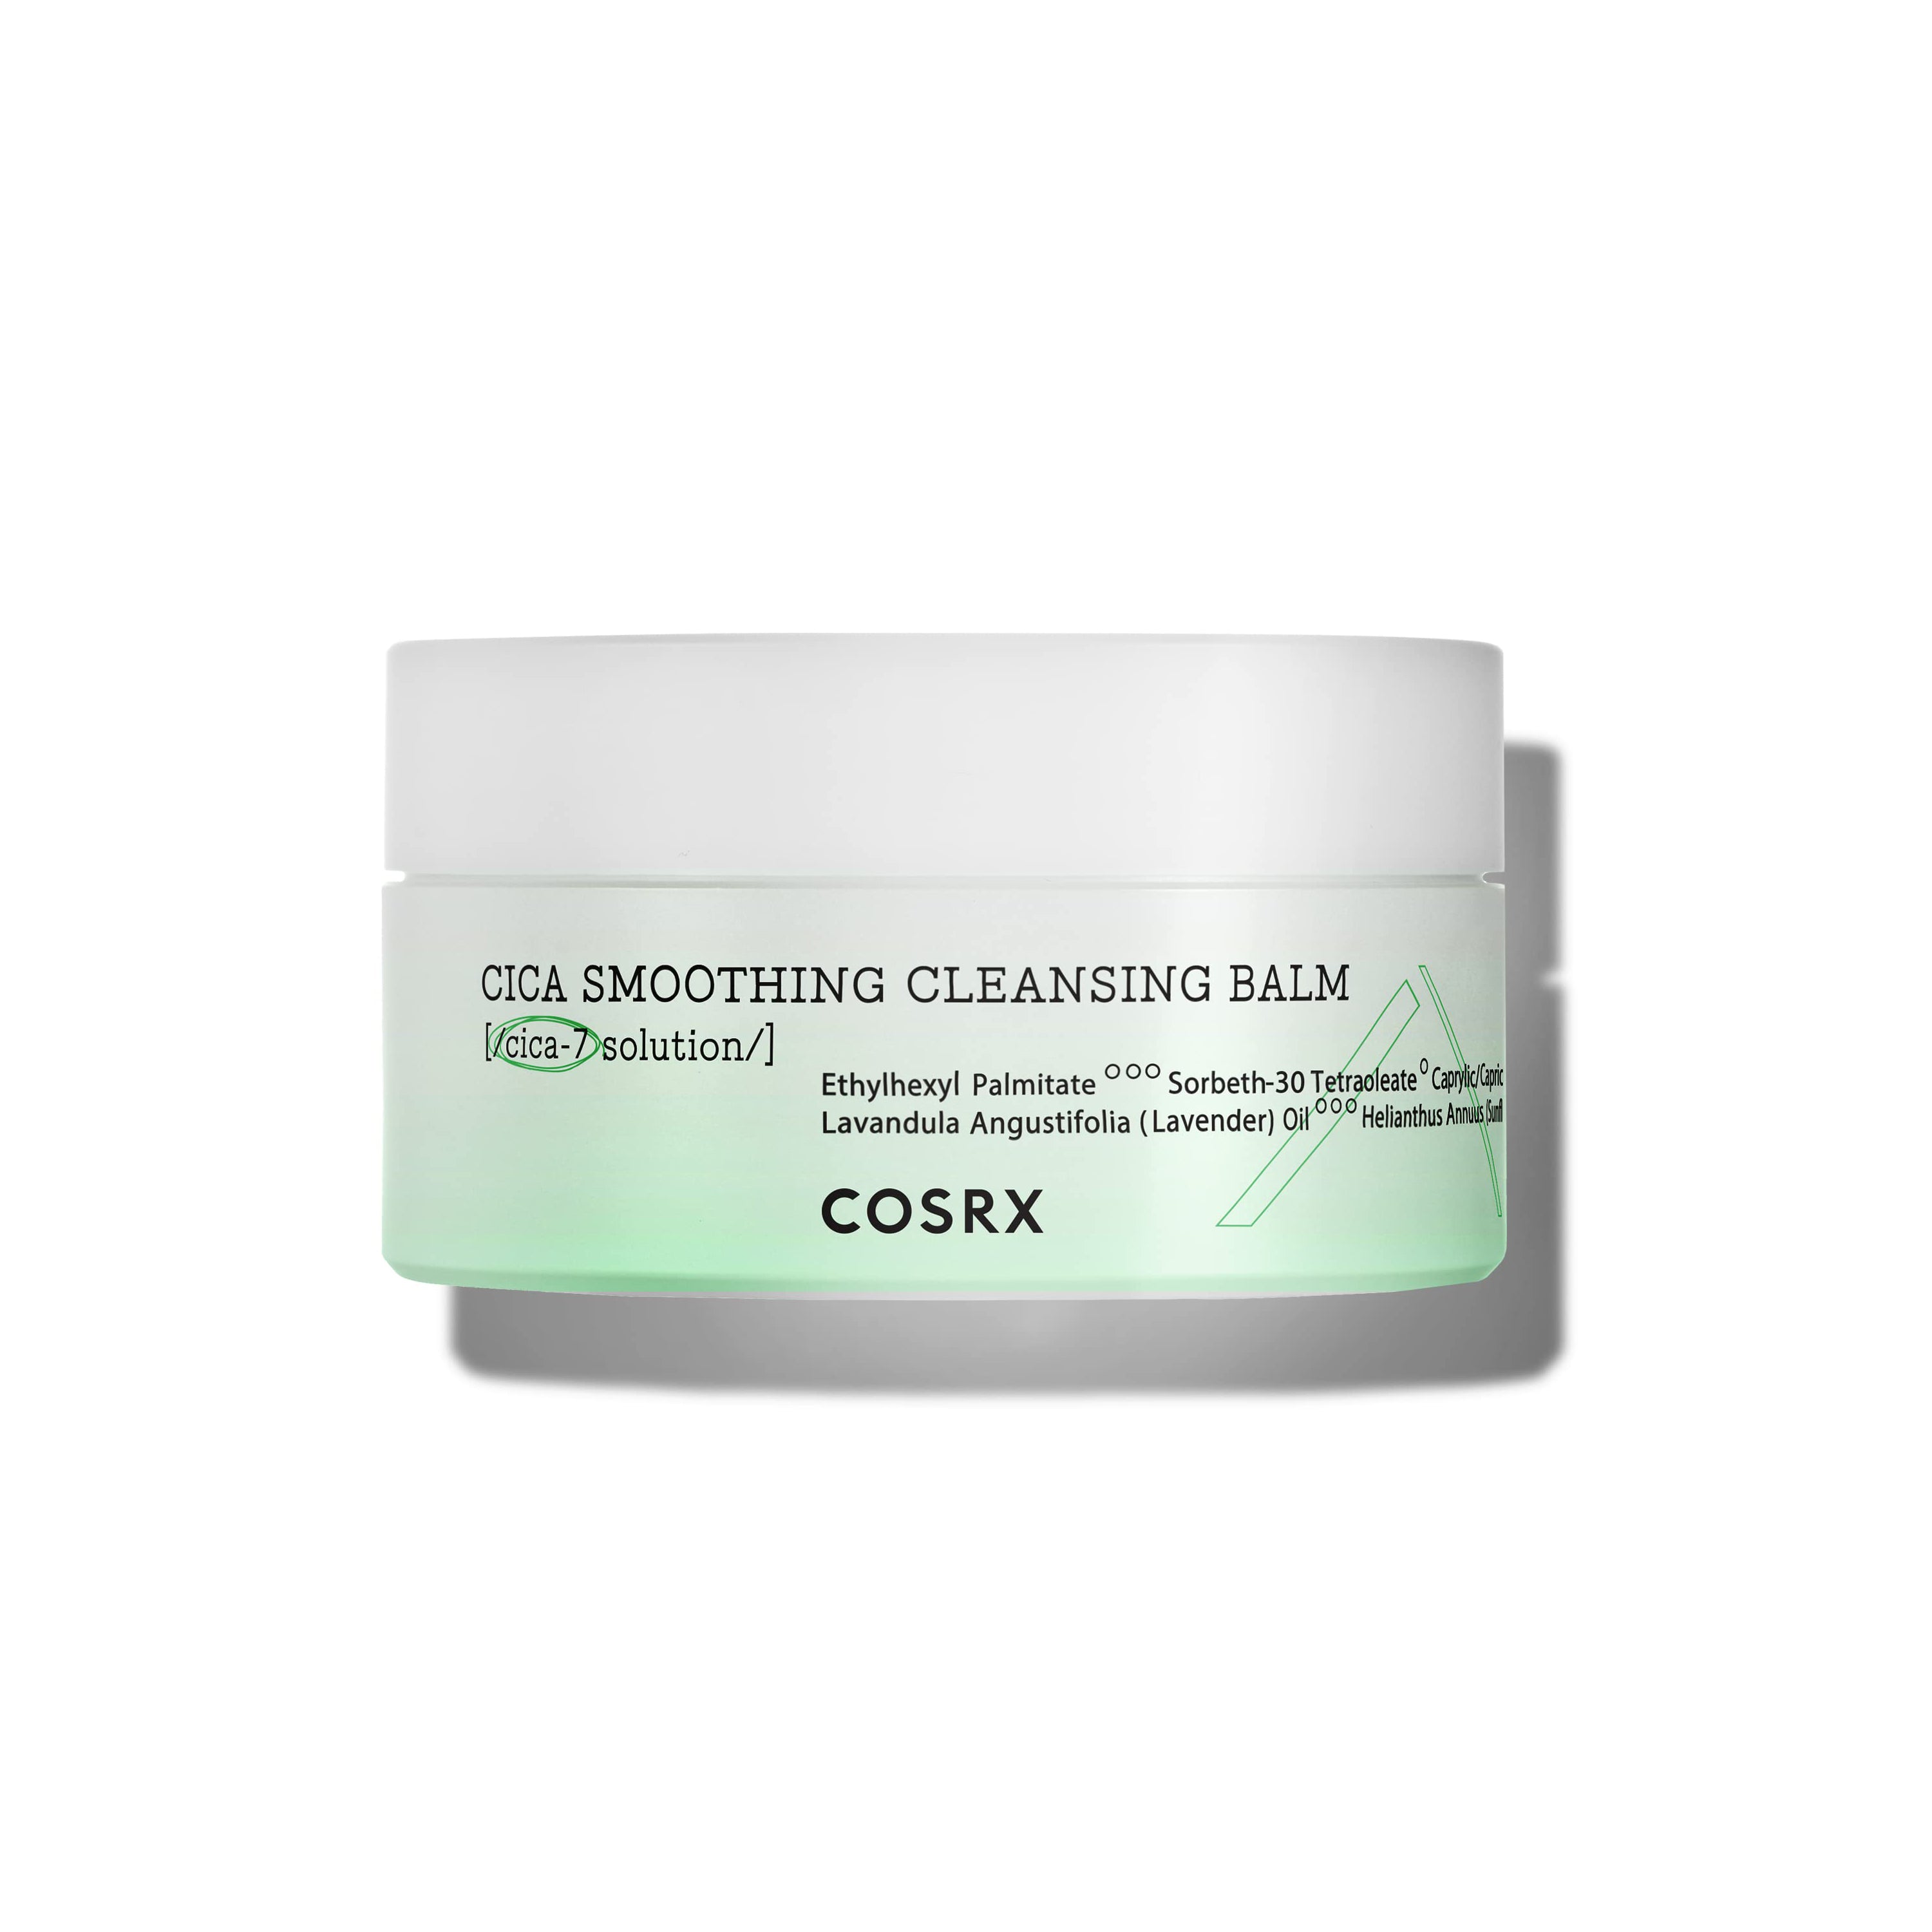 Cosrx Cica Smoothing Cleansing Balm Beauty Cosrx   